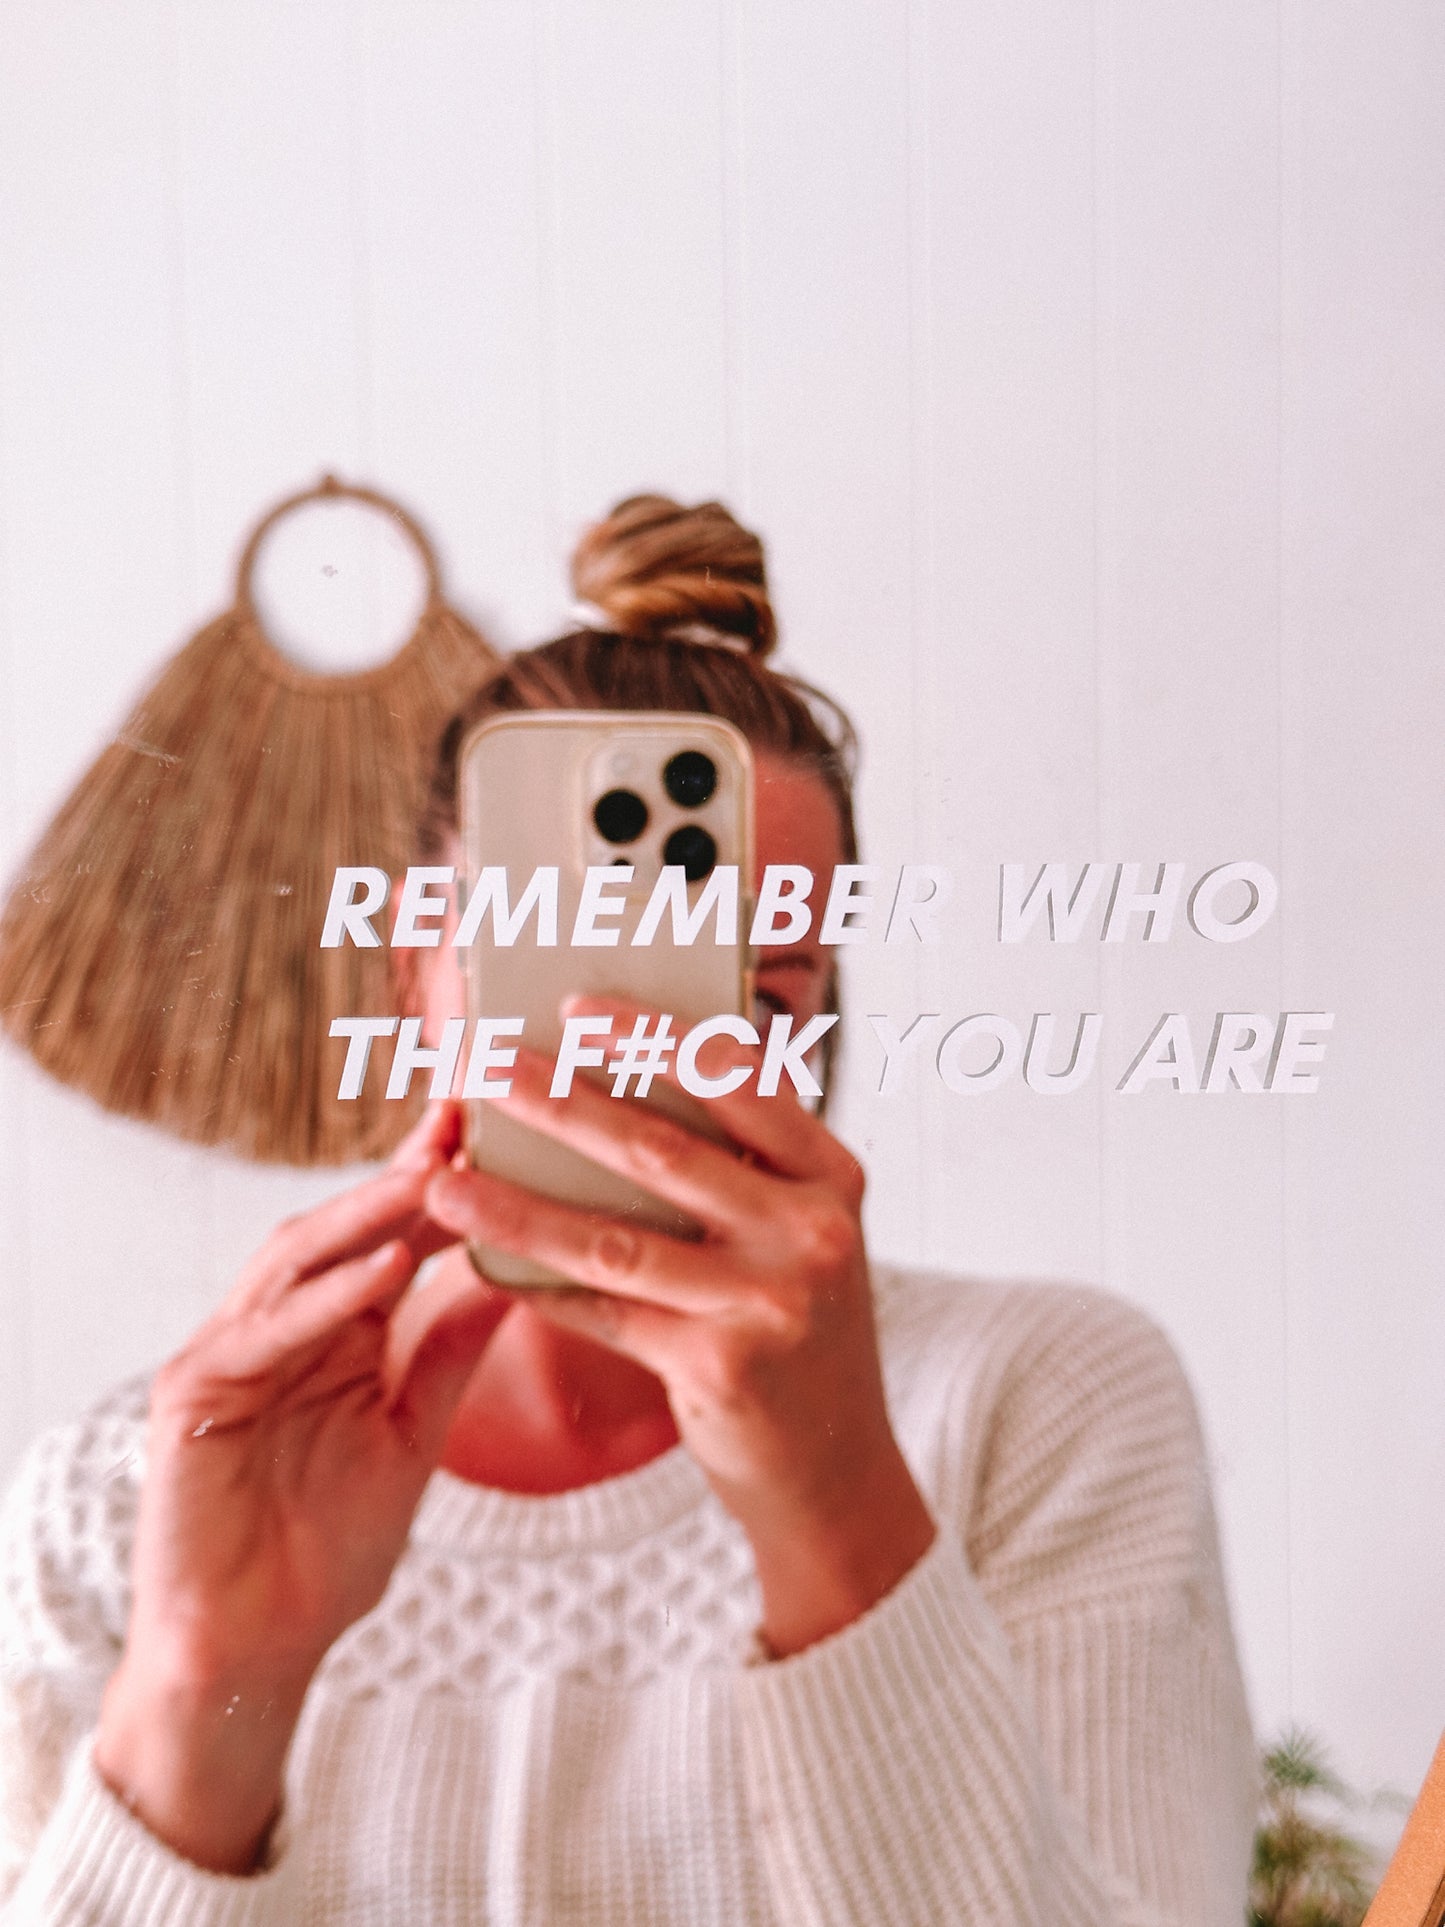 Remember who the f#ck you are  - Decal